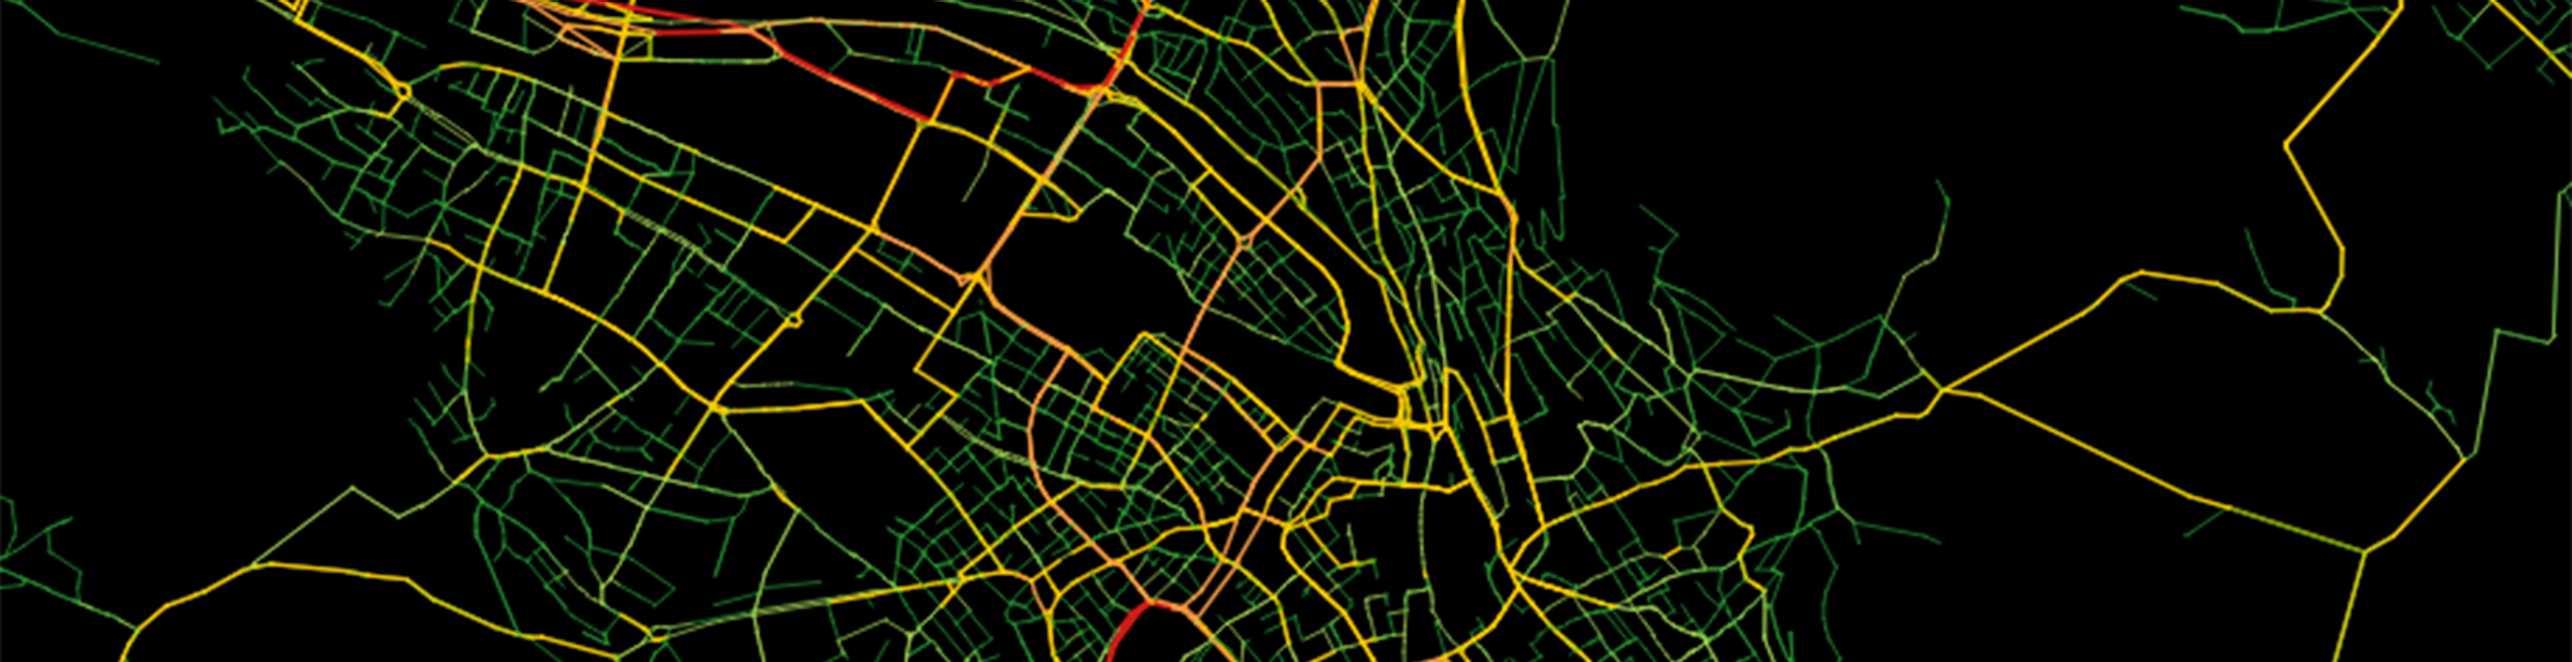 Traffic flow simulation in the city center of Zurich 